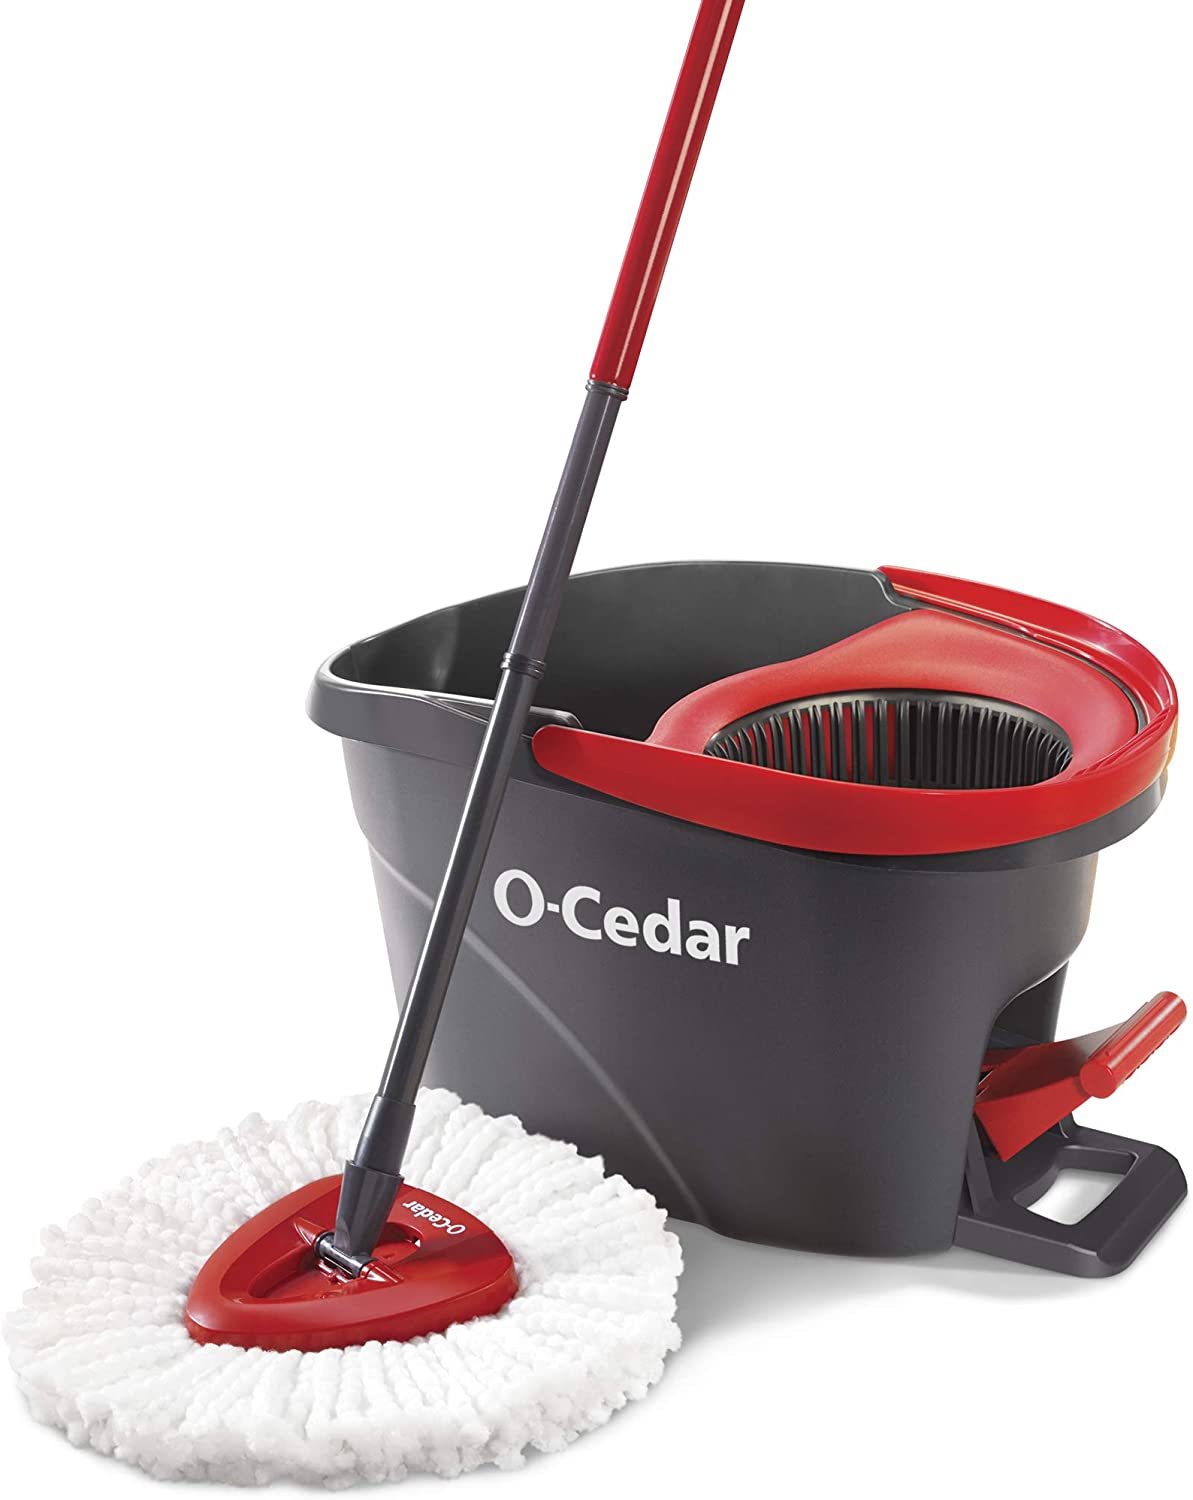 O-Cedar EasyWring Microfiber Spin Mop, Bucket Floor Cleaning System, Red, Gray 46